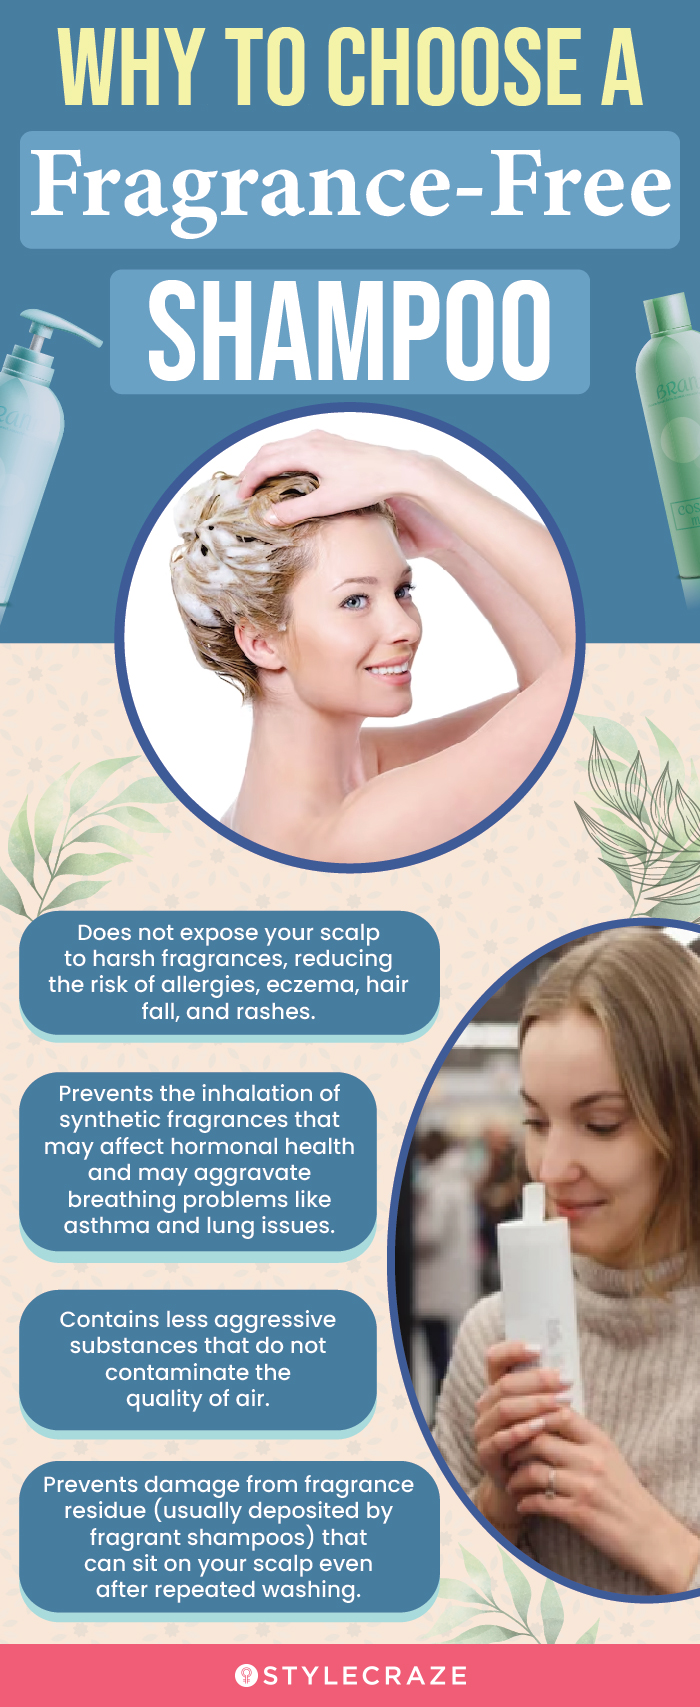 Why To Choose A Fragrance-Free Shampoo (infographic)